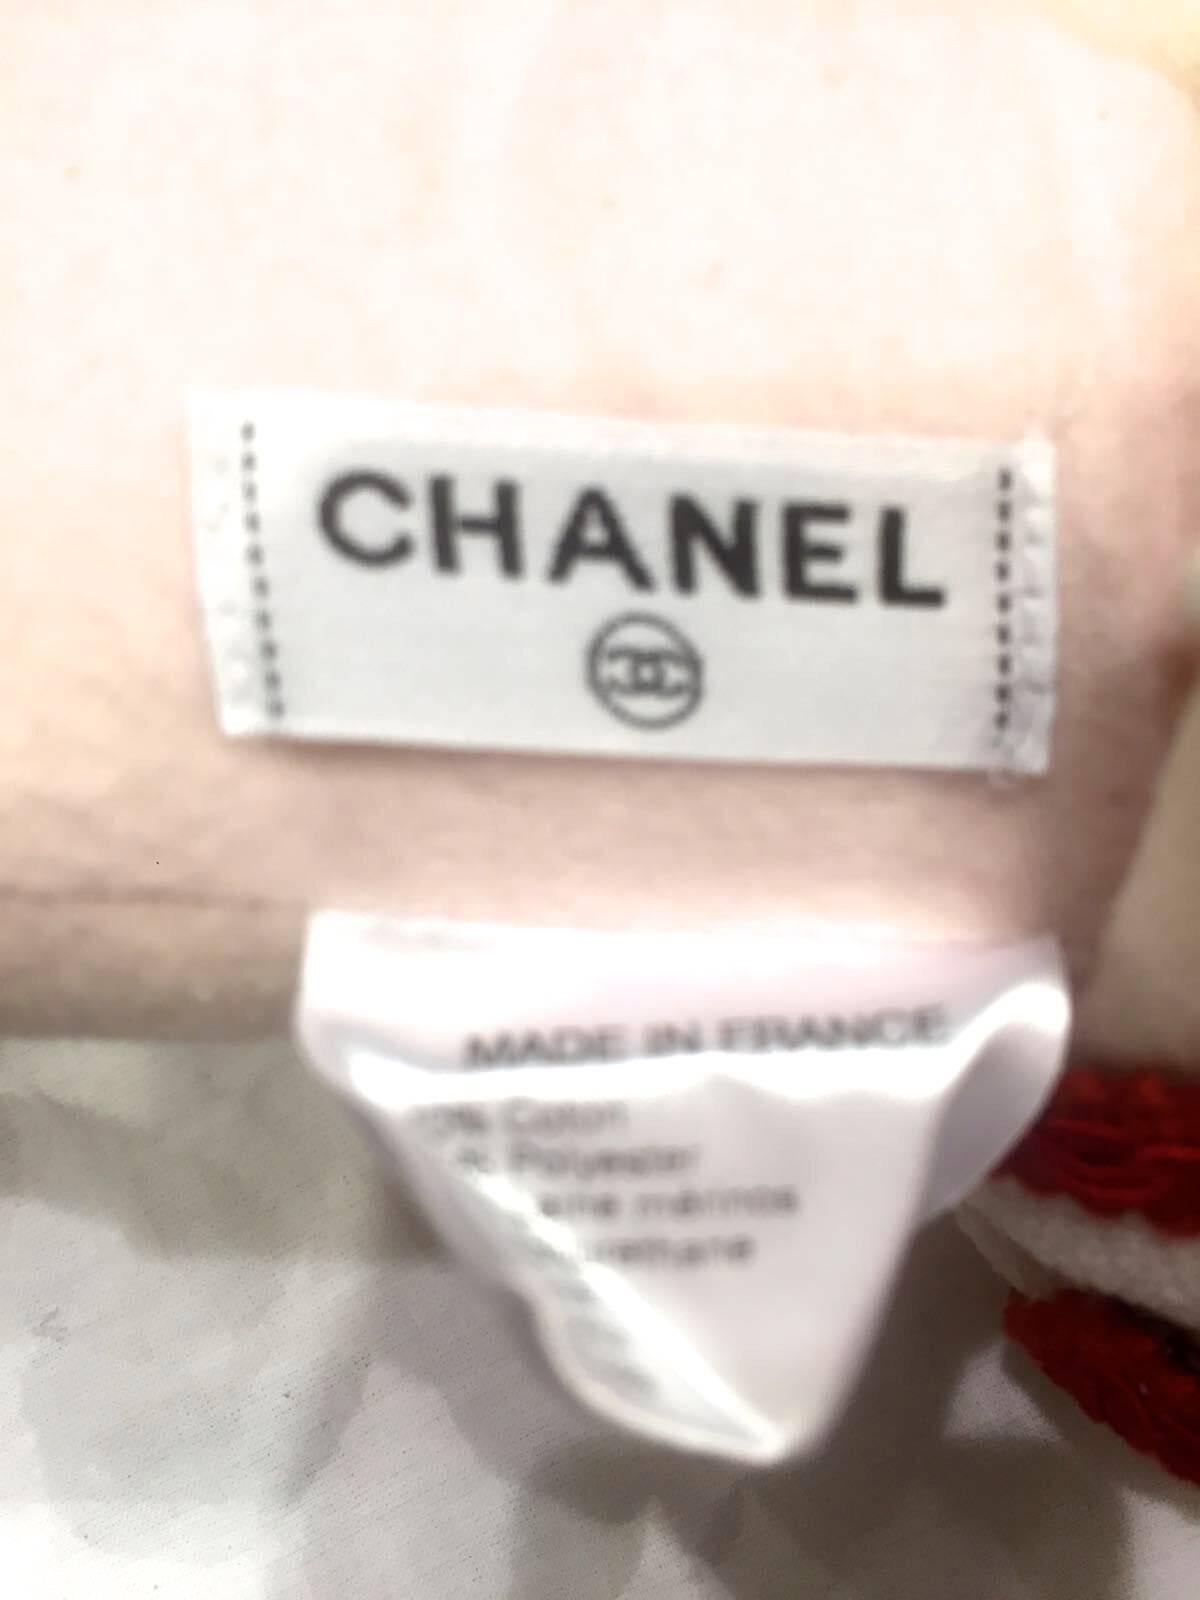 White Chanel Doll - Karl Lagerfeld Design for Chanel Display - Extremely Rare 